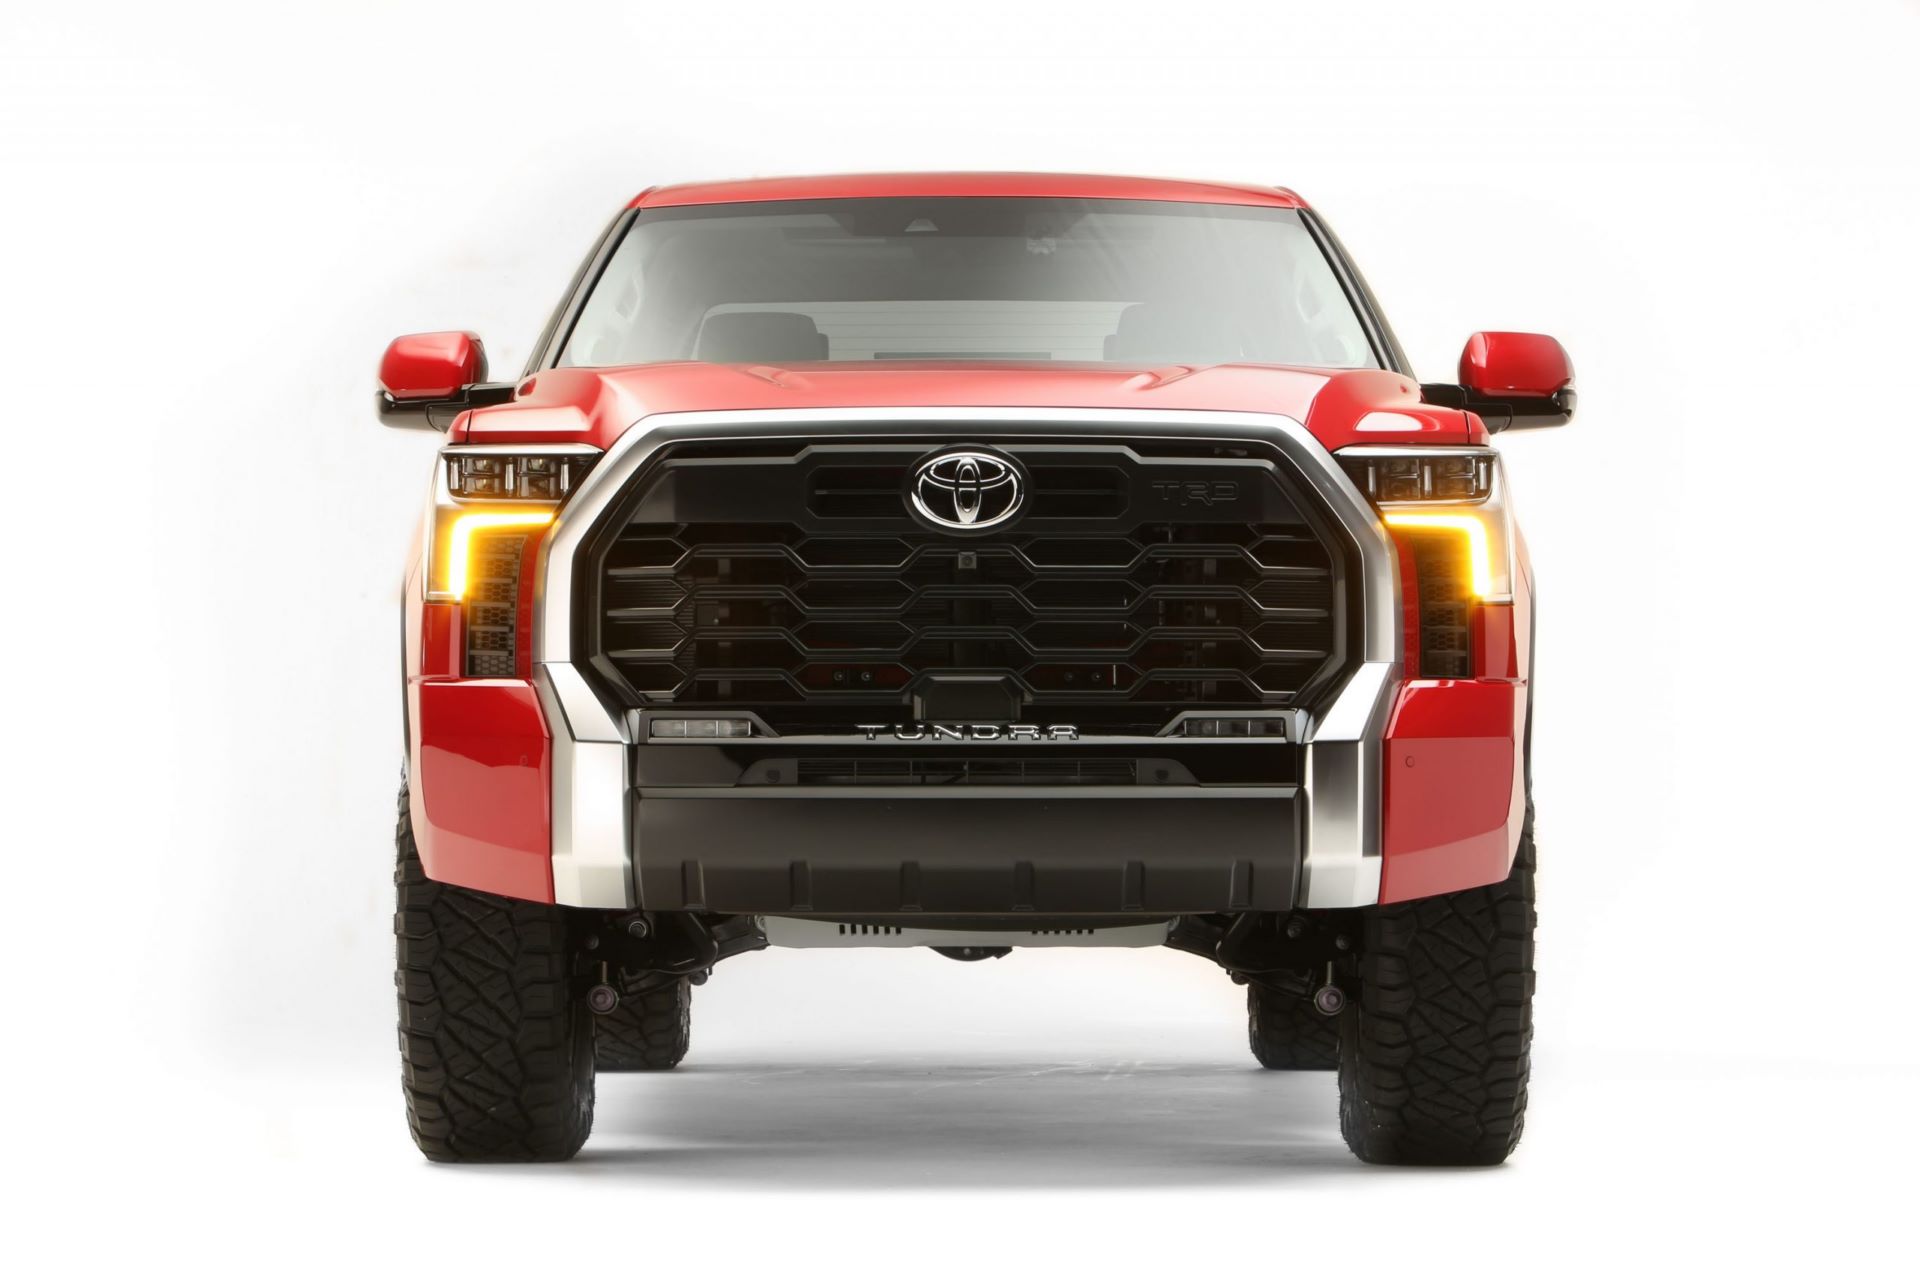 2022_Lifted_And_Accesorized_Tundra_SEMA_2021_LowRes_9-scaled